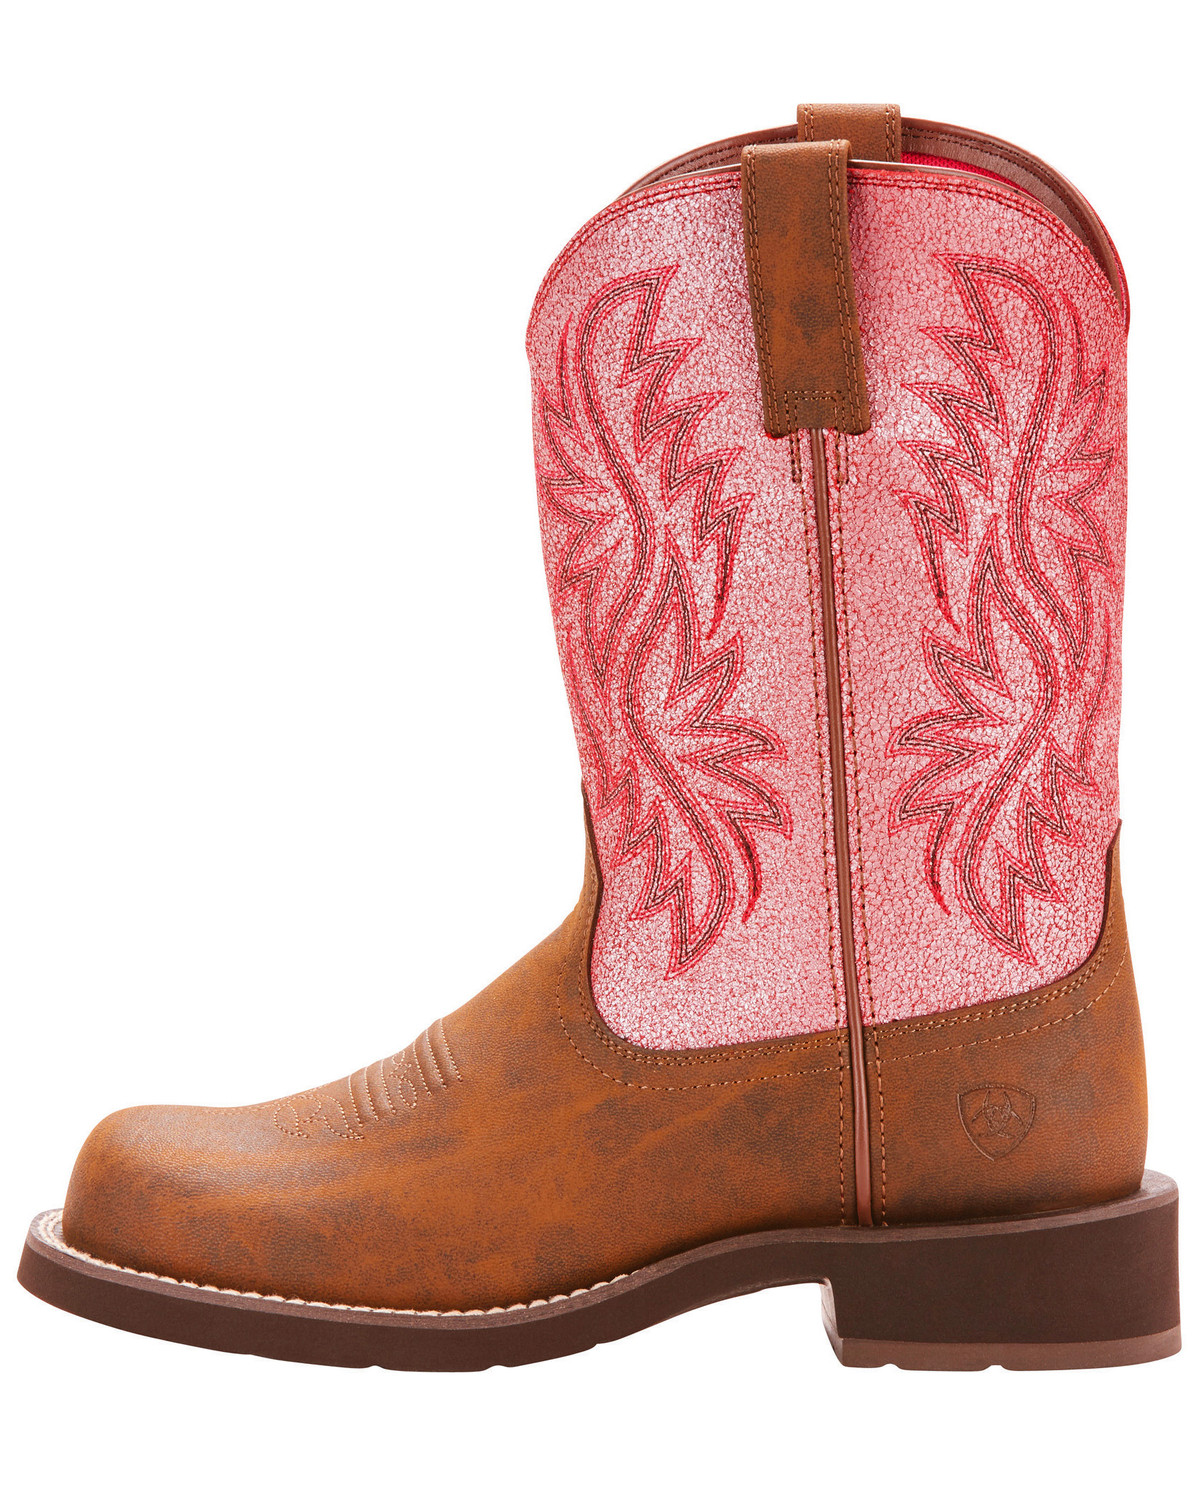 women's ariat fatbaby boots on clearance